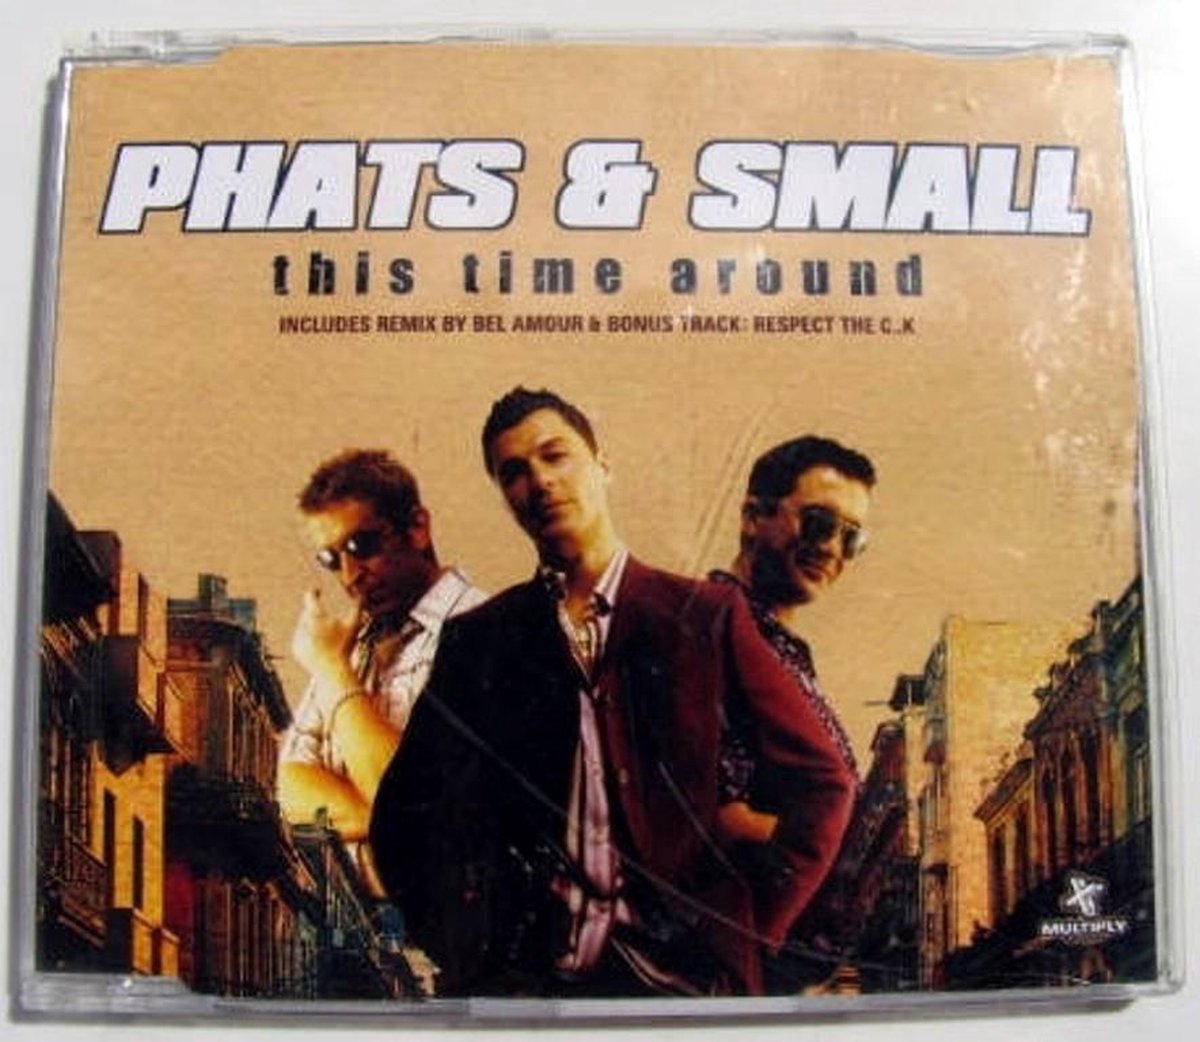 This Time Around - Phats And Small